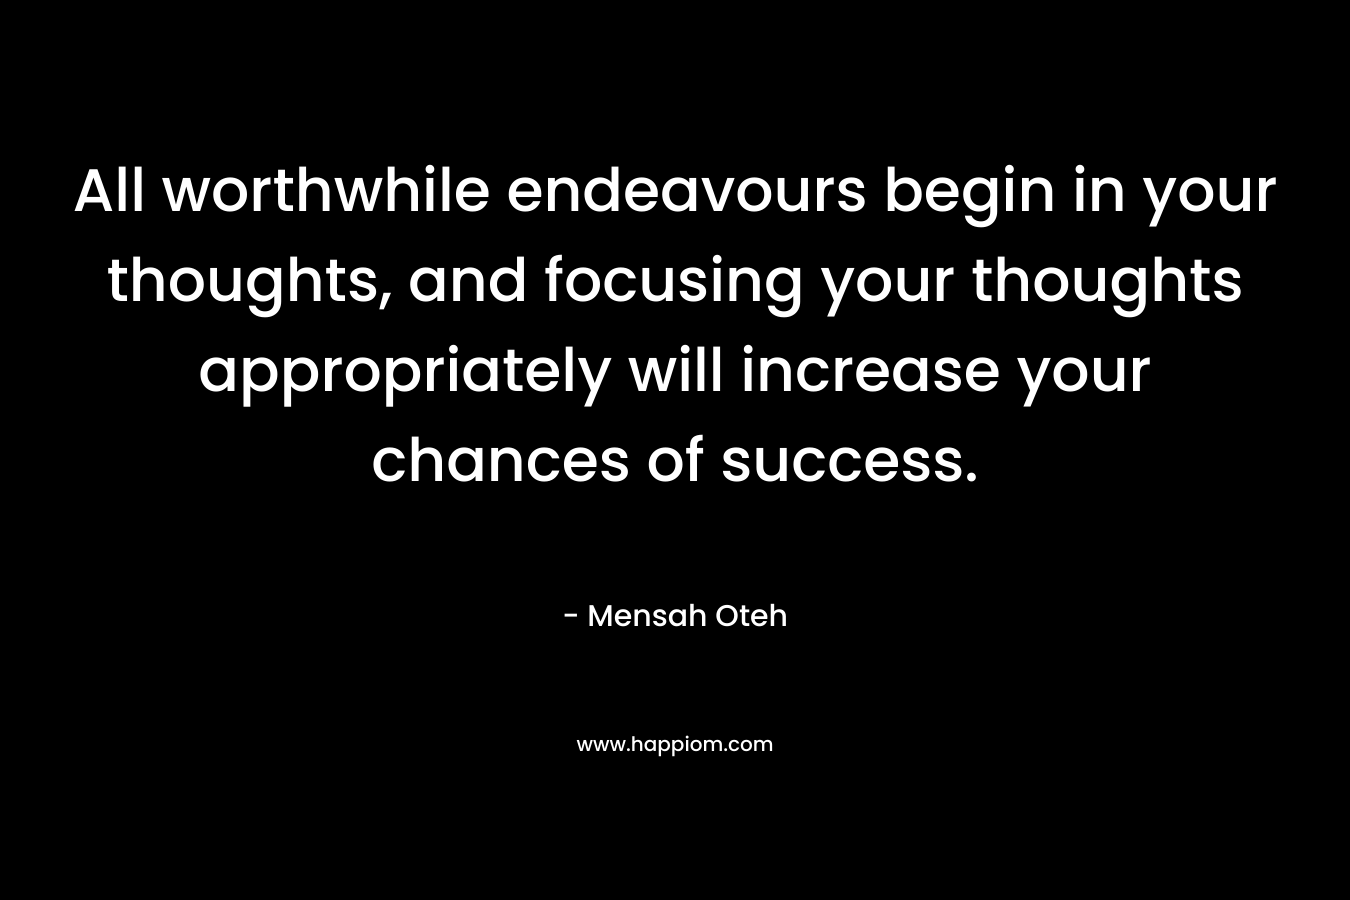 All worthwhile endeavours begin in your thoughts, and focusing your thoughts appropriately will increase your chances of success.